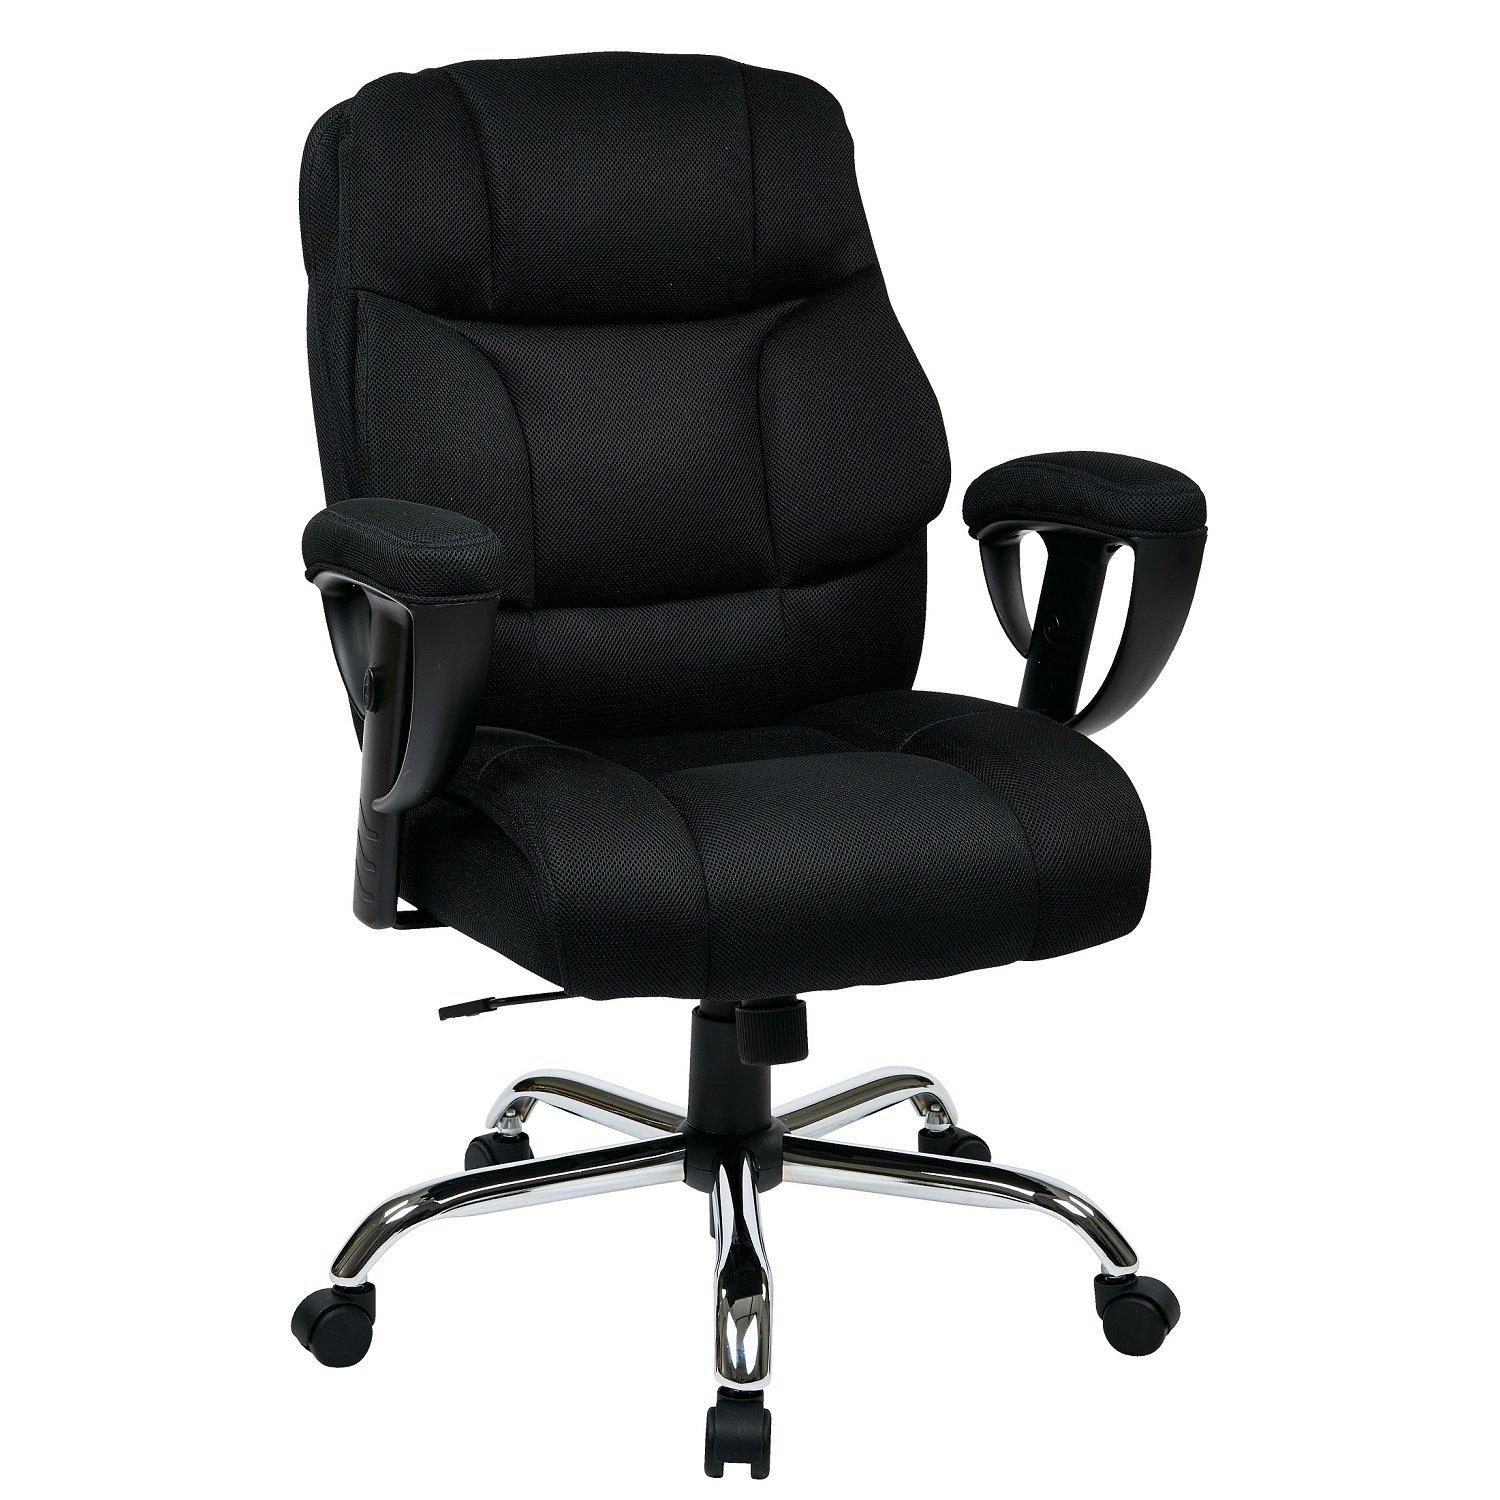 Executive Big Man's Chair with Mesh Seat and Back